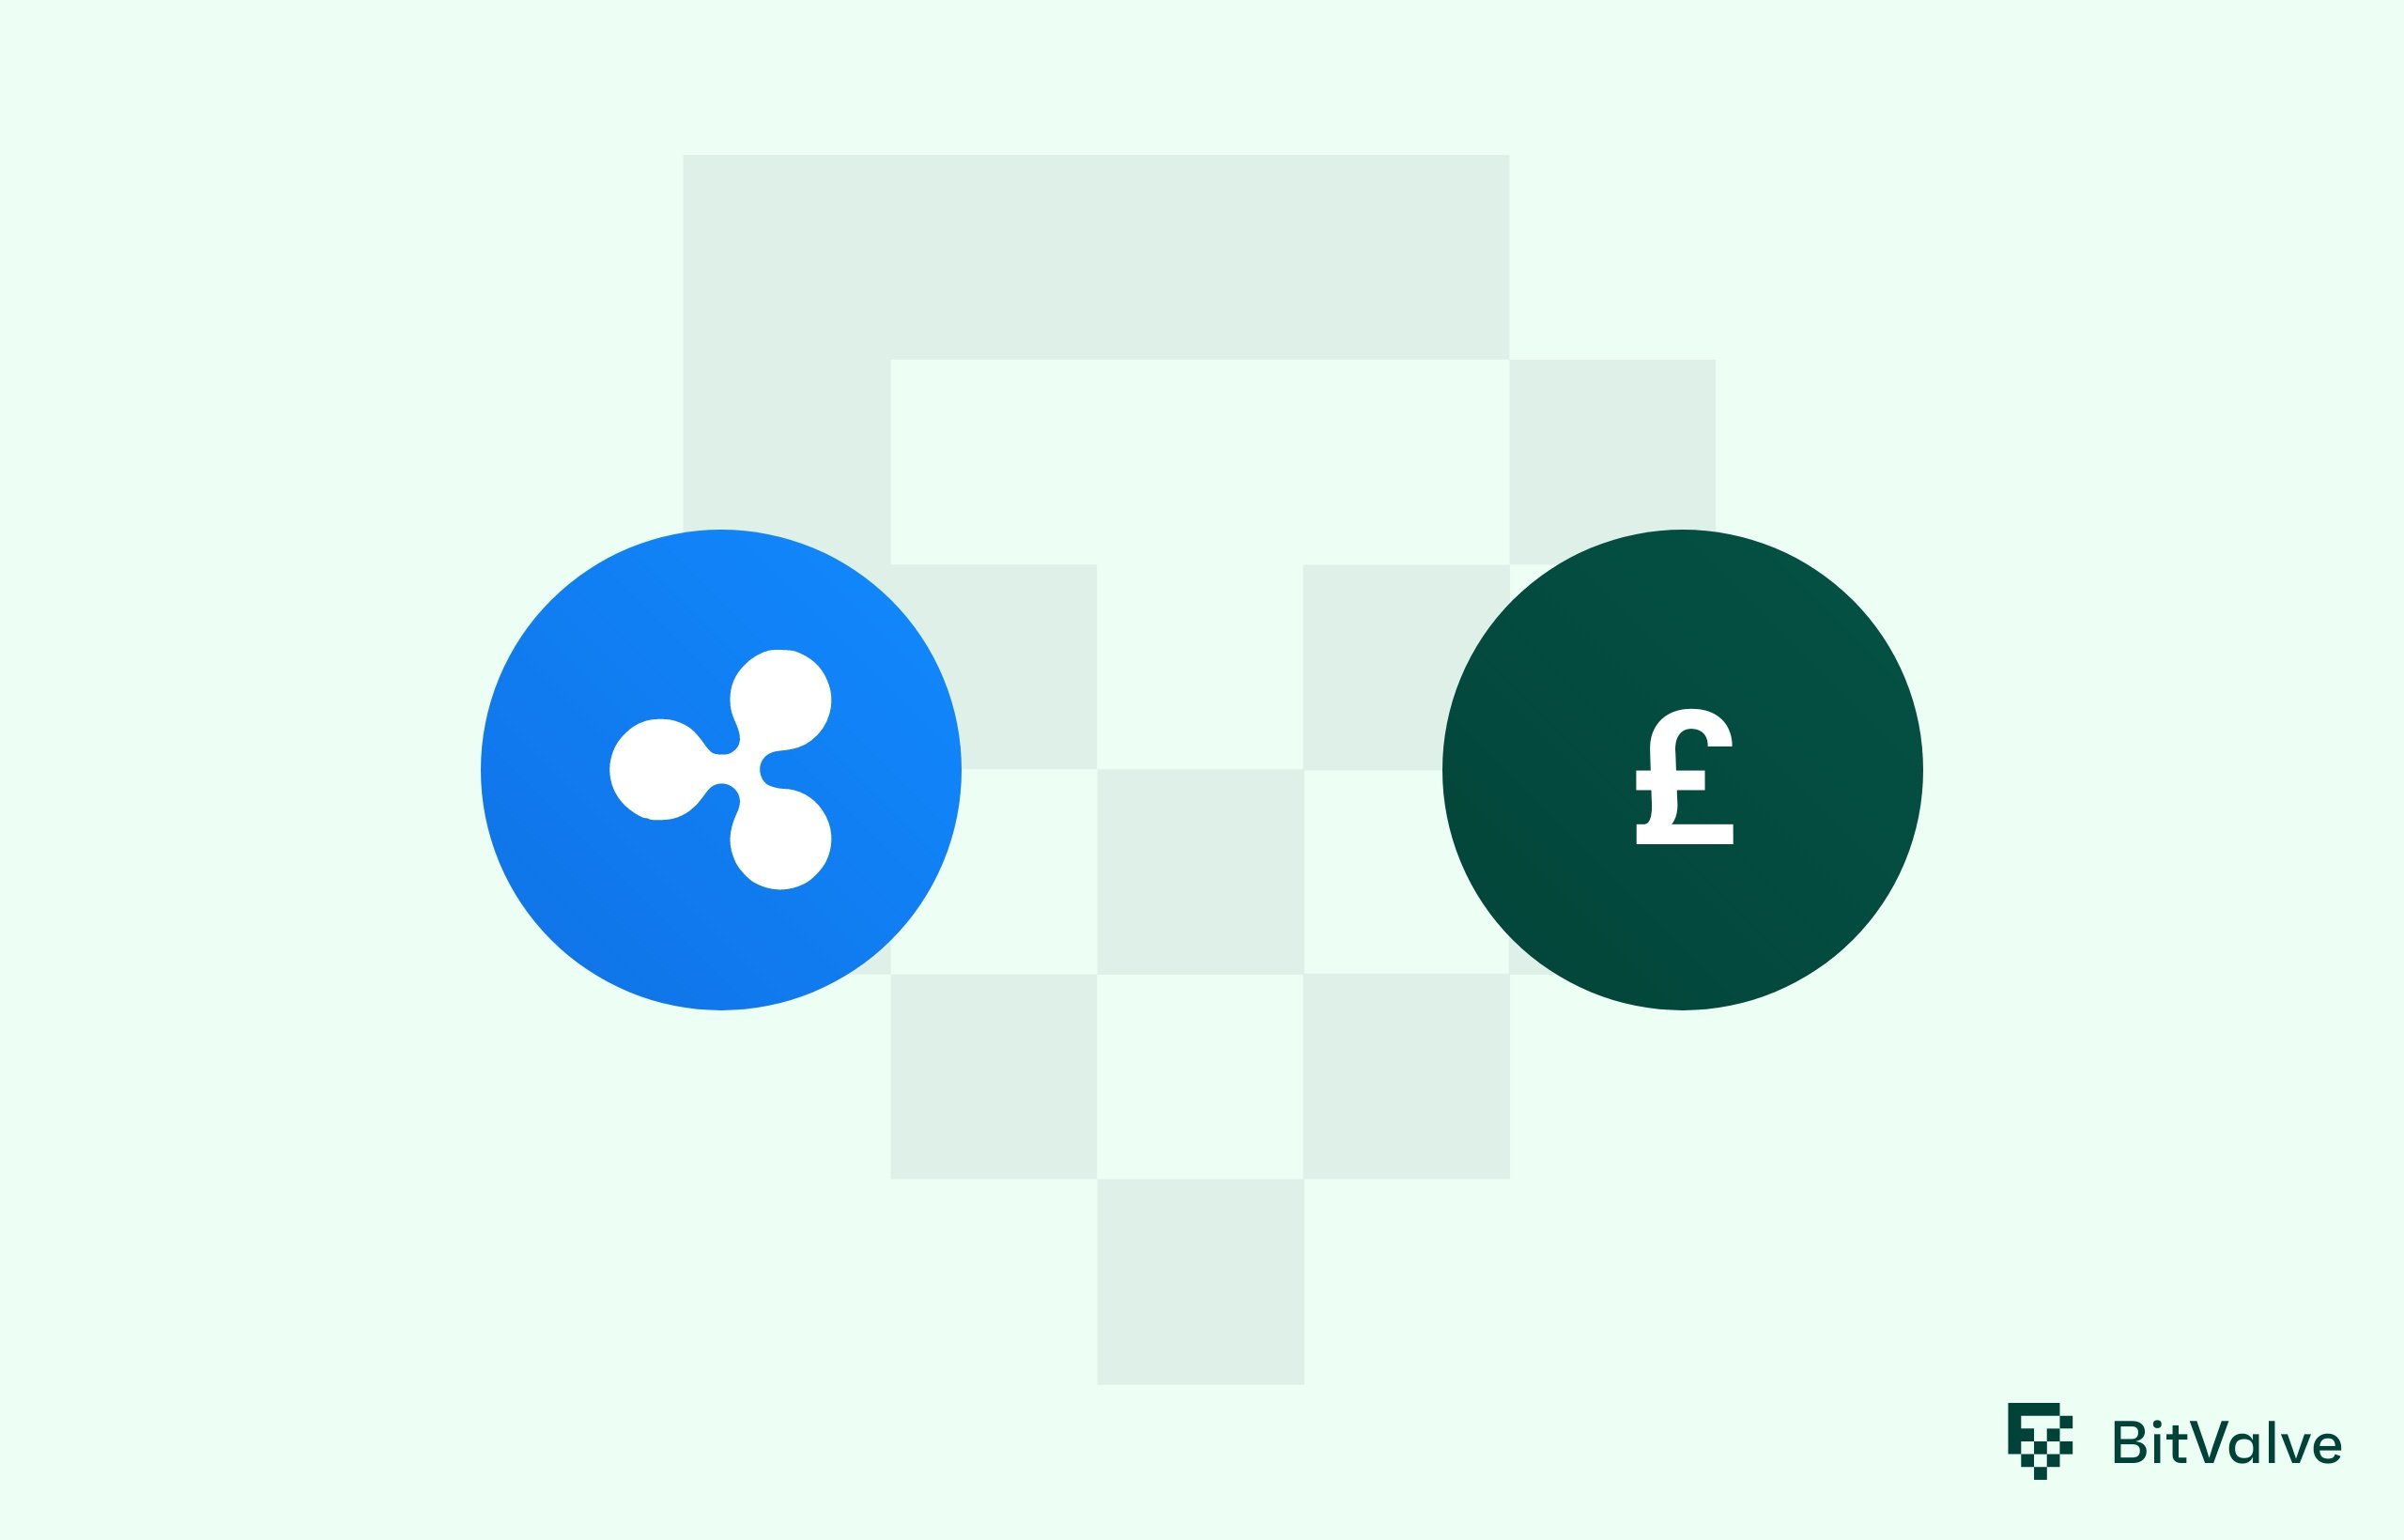 Ripple price in GBP and XRP-GBP price history chart